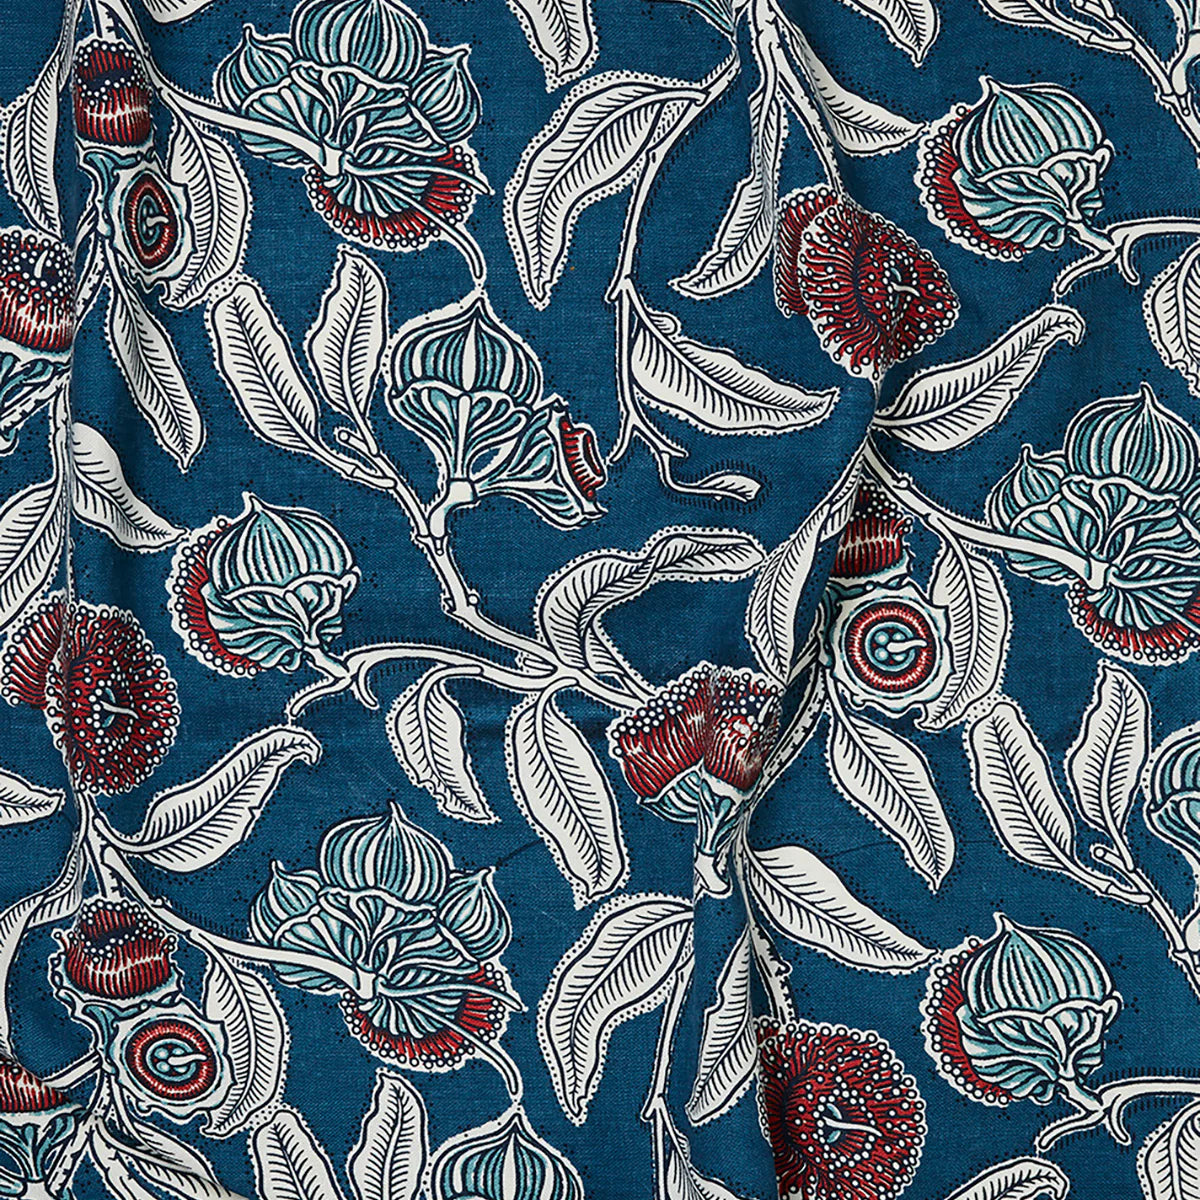 Draped fabric in a painterly floral print in blue, white and red on a navy field.